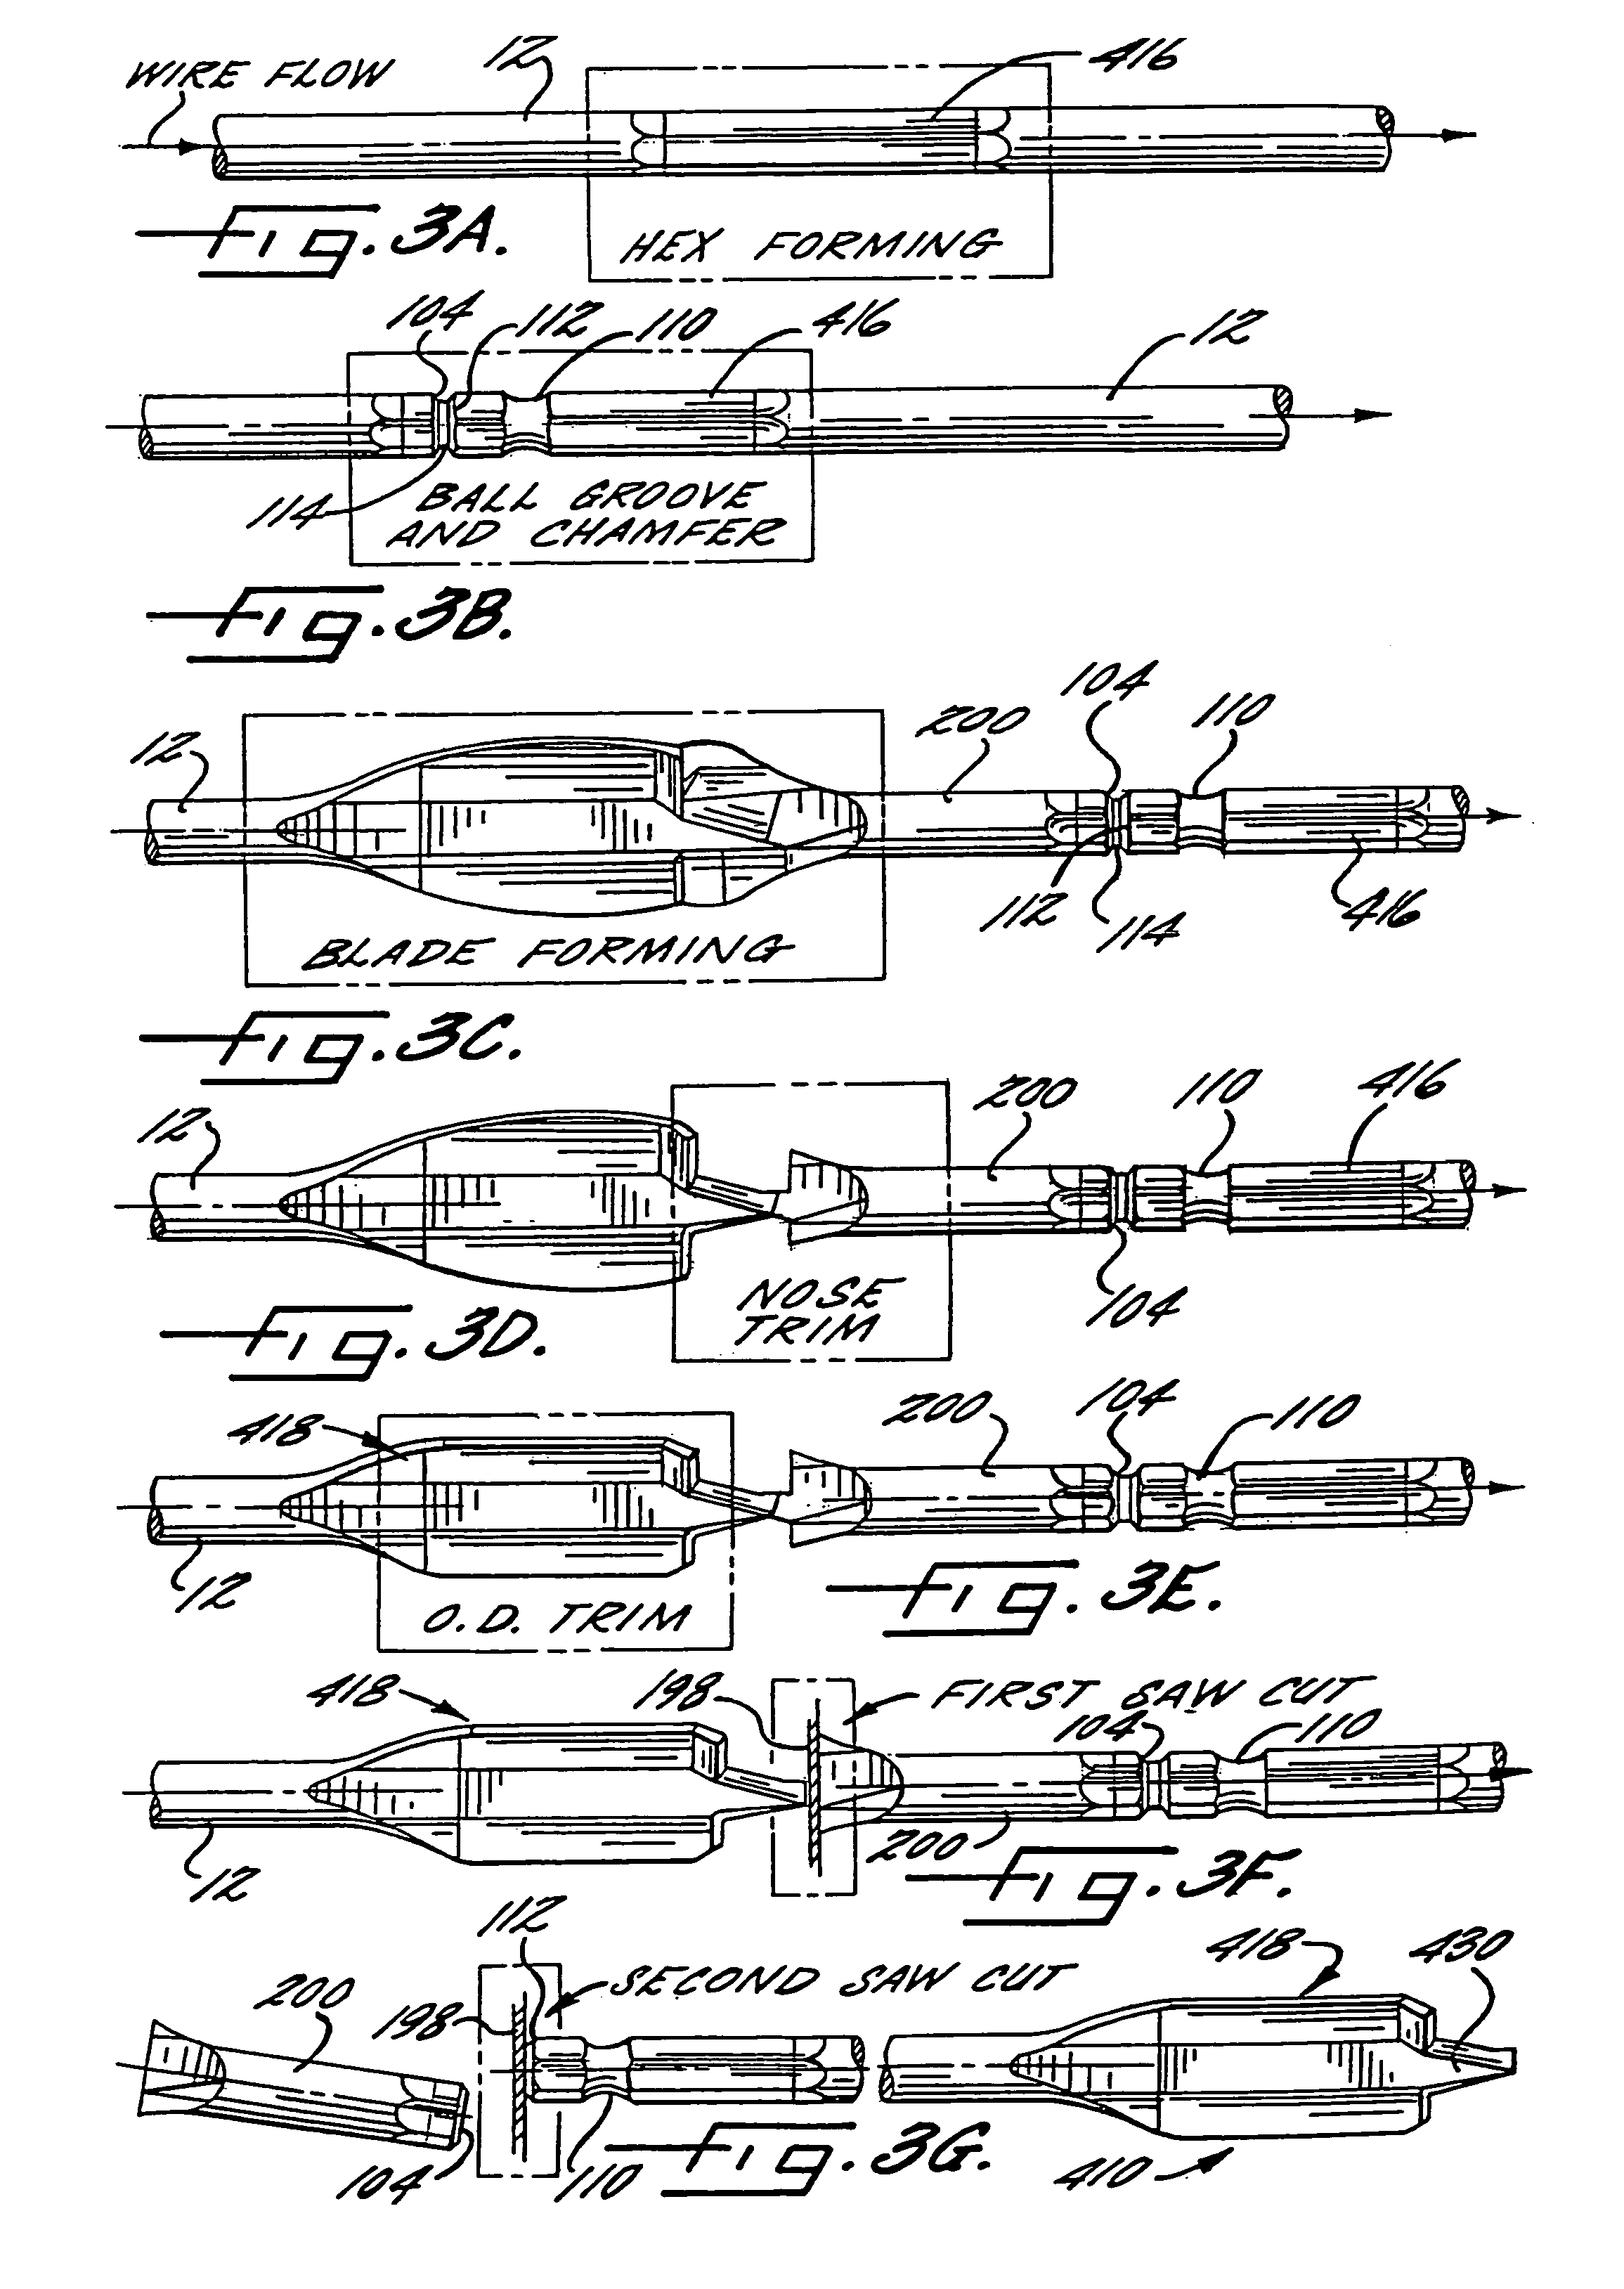 Method and apparatus for forming parts from a continuous stock material and associated forge